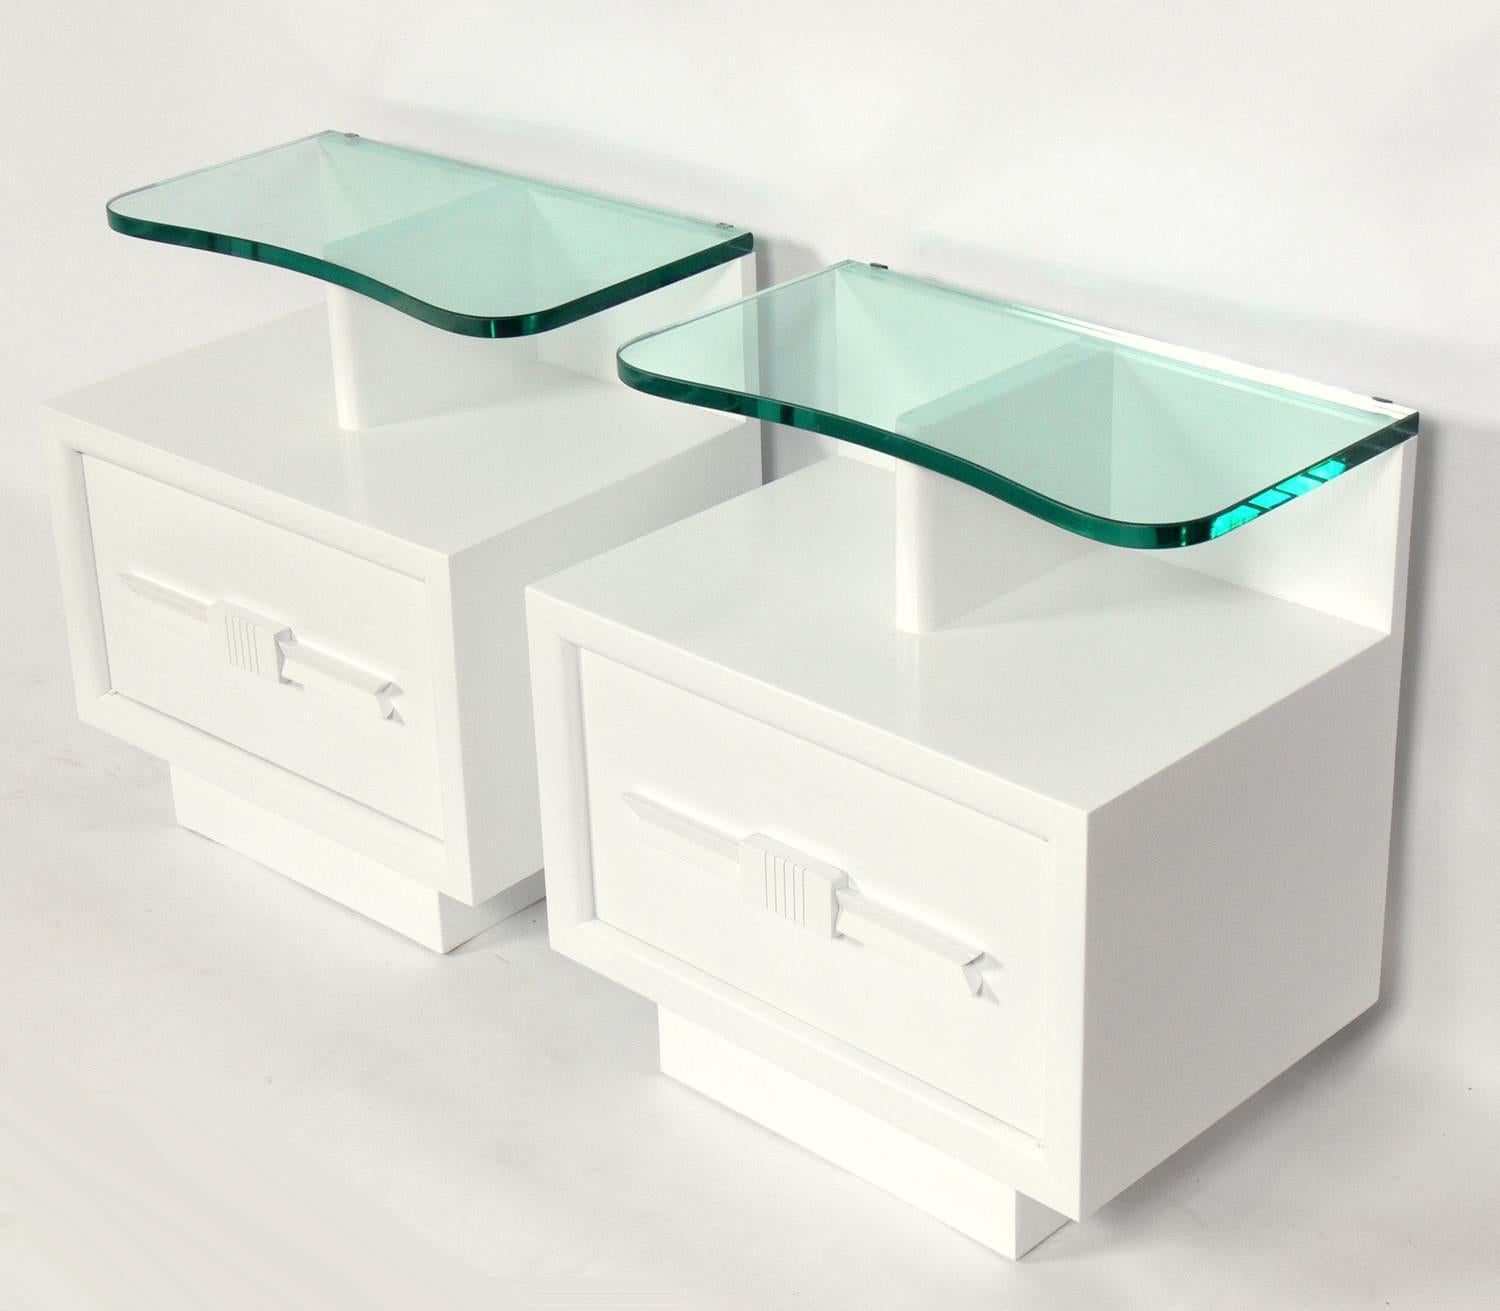 Pair of glamorous white lacquer and glass nightstands, American, circa 1930s. They have been refinished and are ready to use. They each feature a low maintenance glass top with a shelf underneath, and a deep drawer at the bottom. They are a